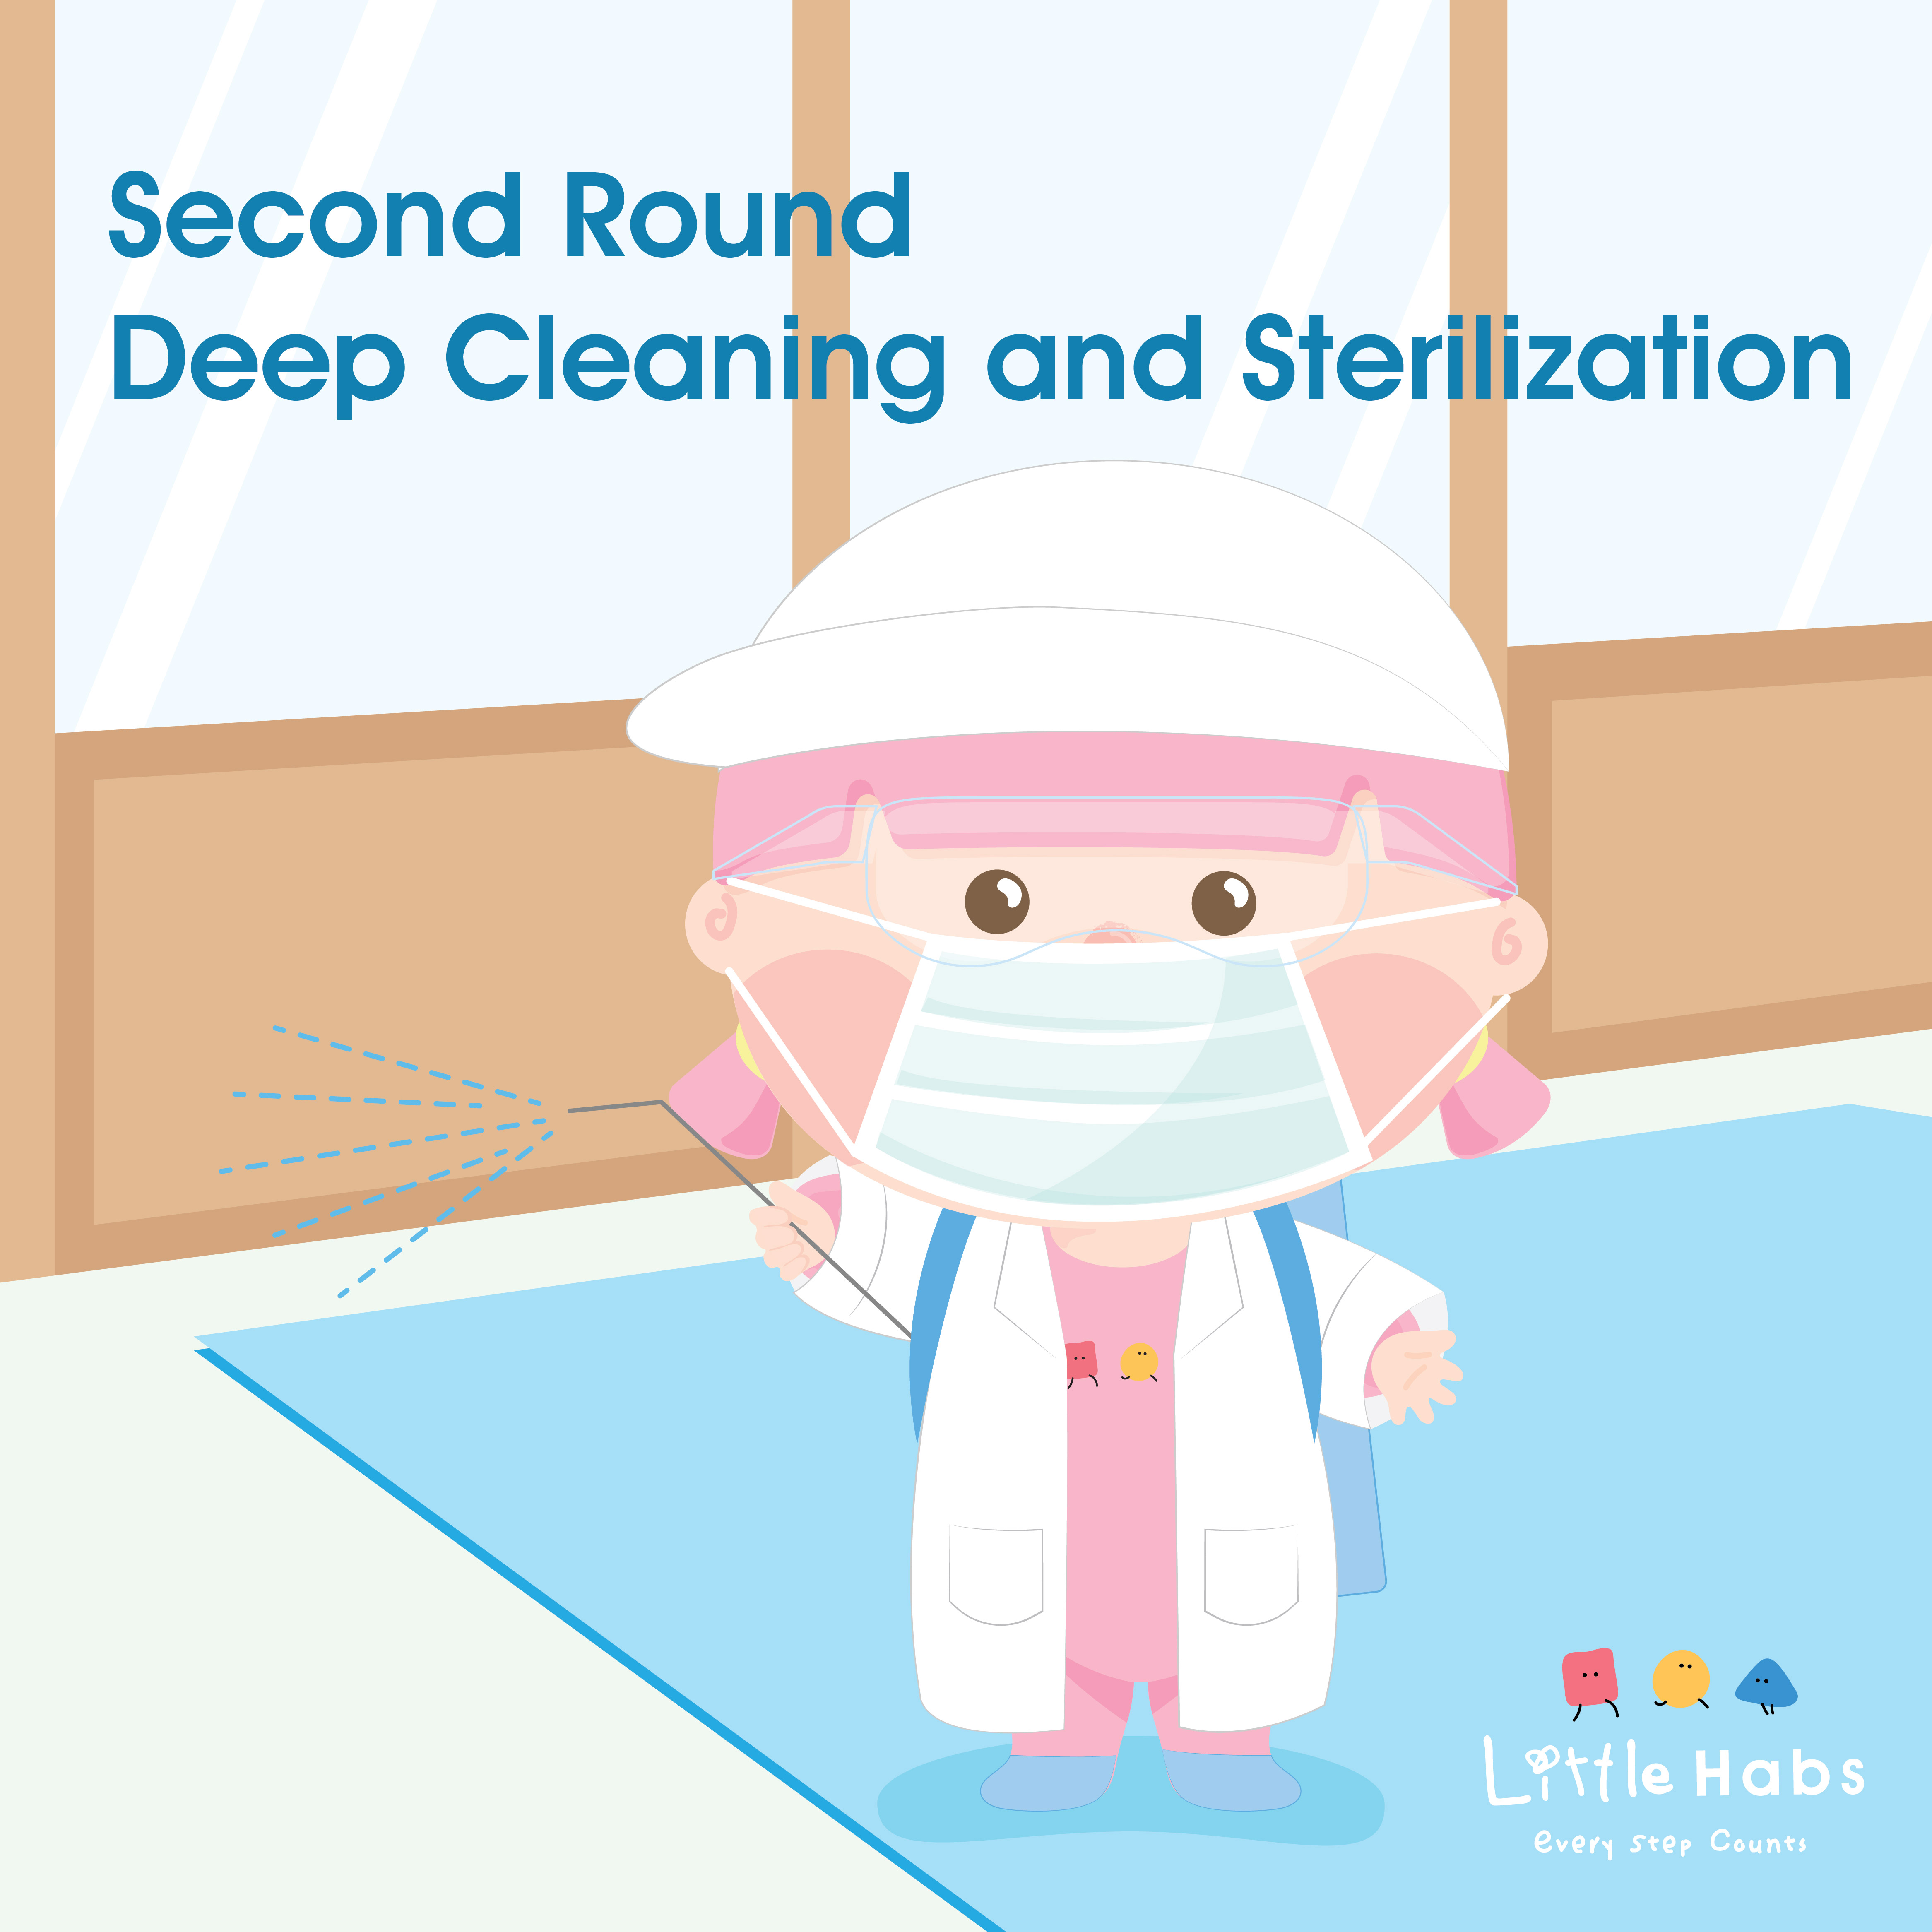 Second Round Deep Cleaning and Sterilization